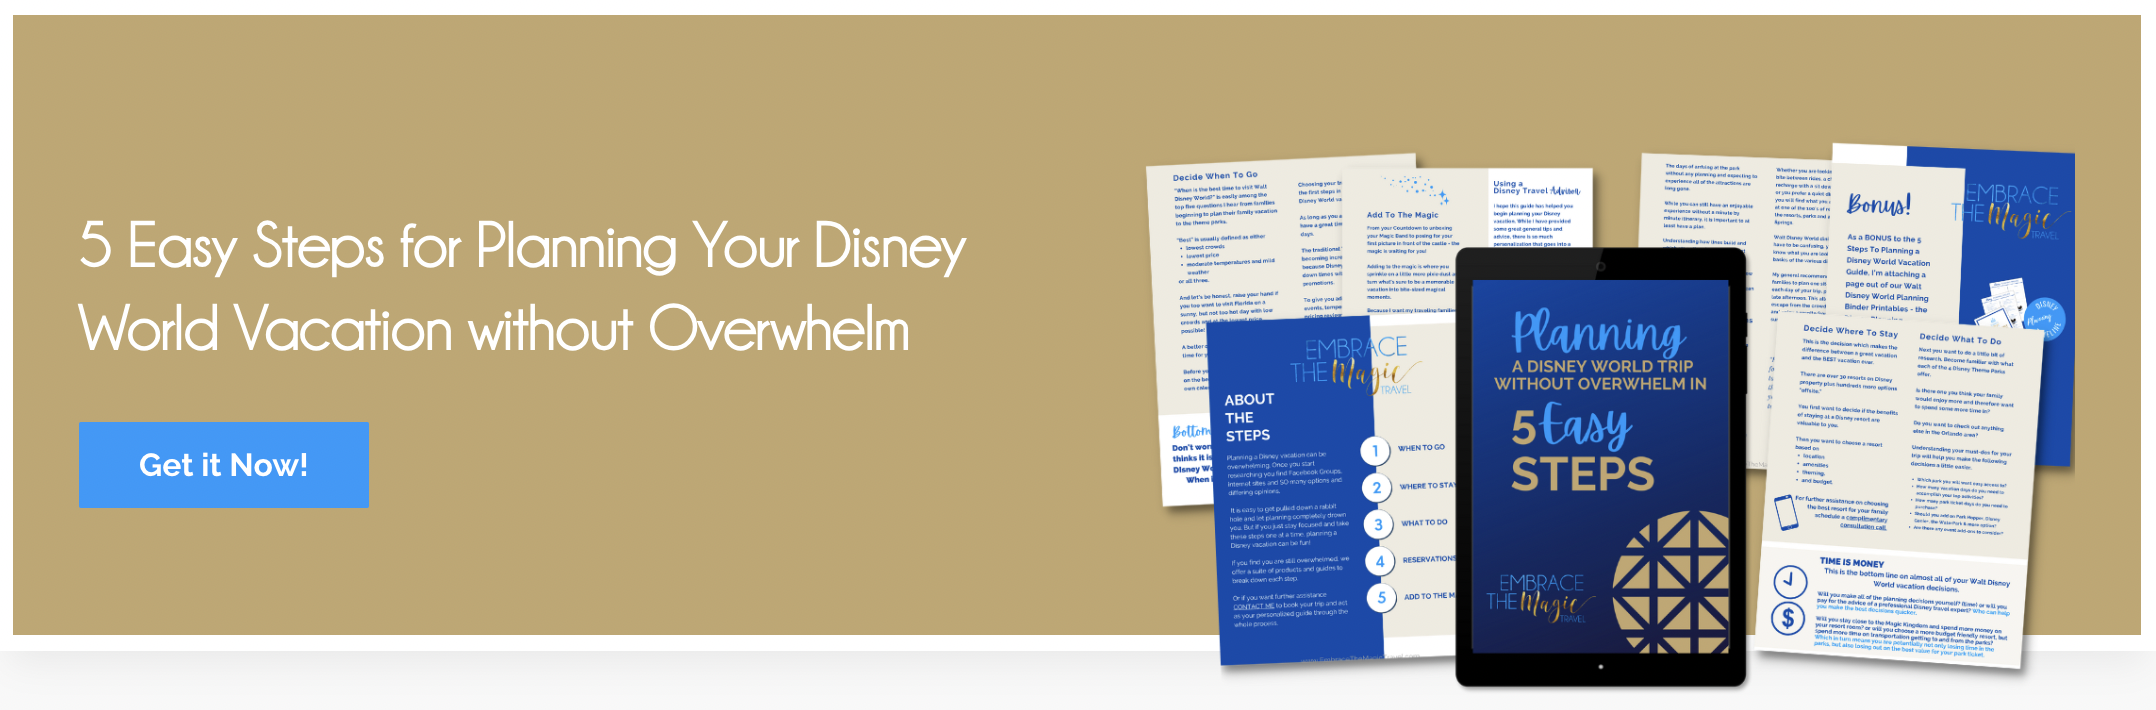 5 Easy Steps to planning your Disney Vacation